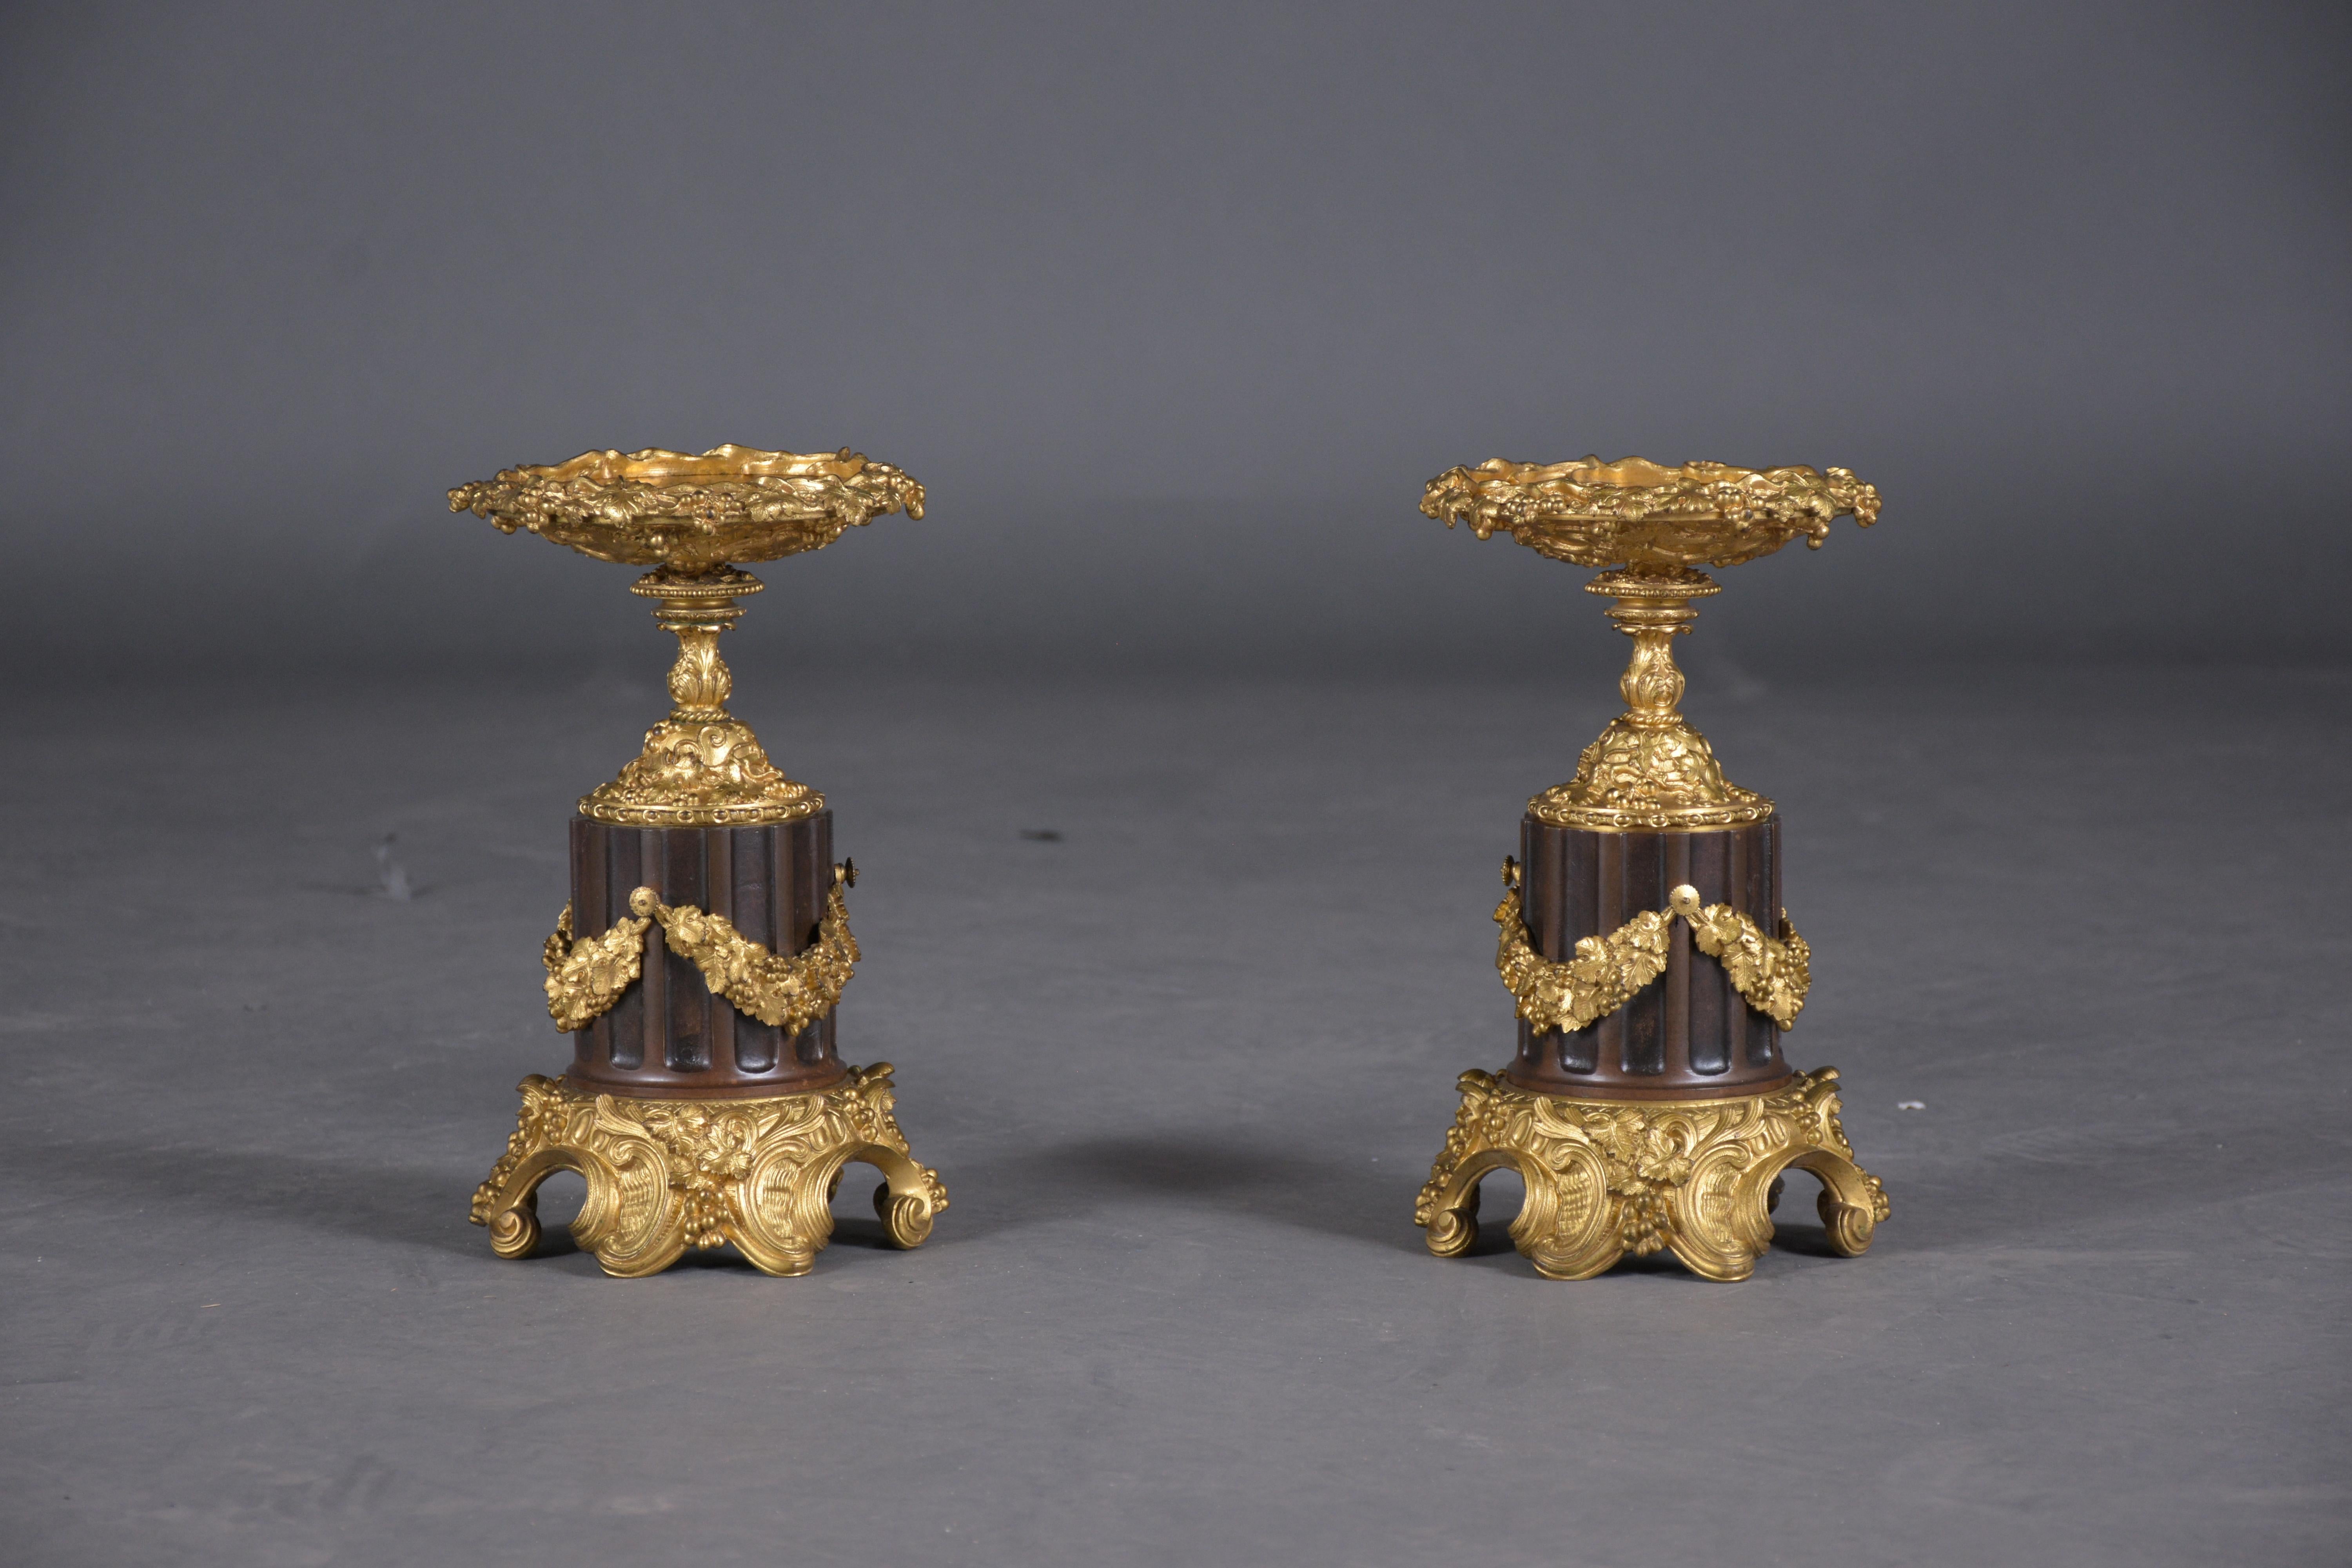 Plated Elegant 19th-Century French Bronzed Urns with Gold Ormolu Details